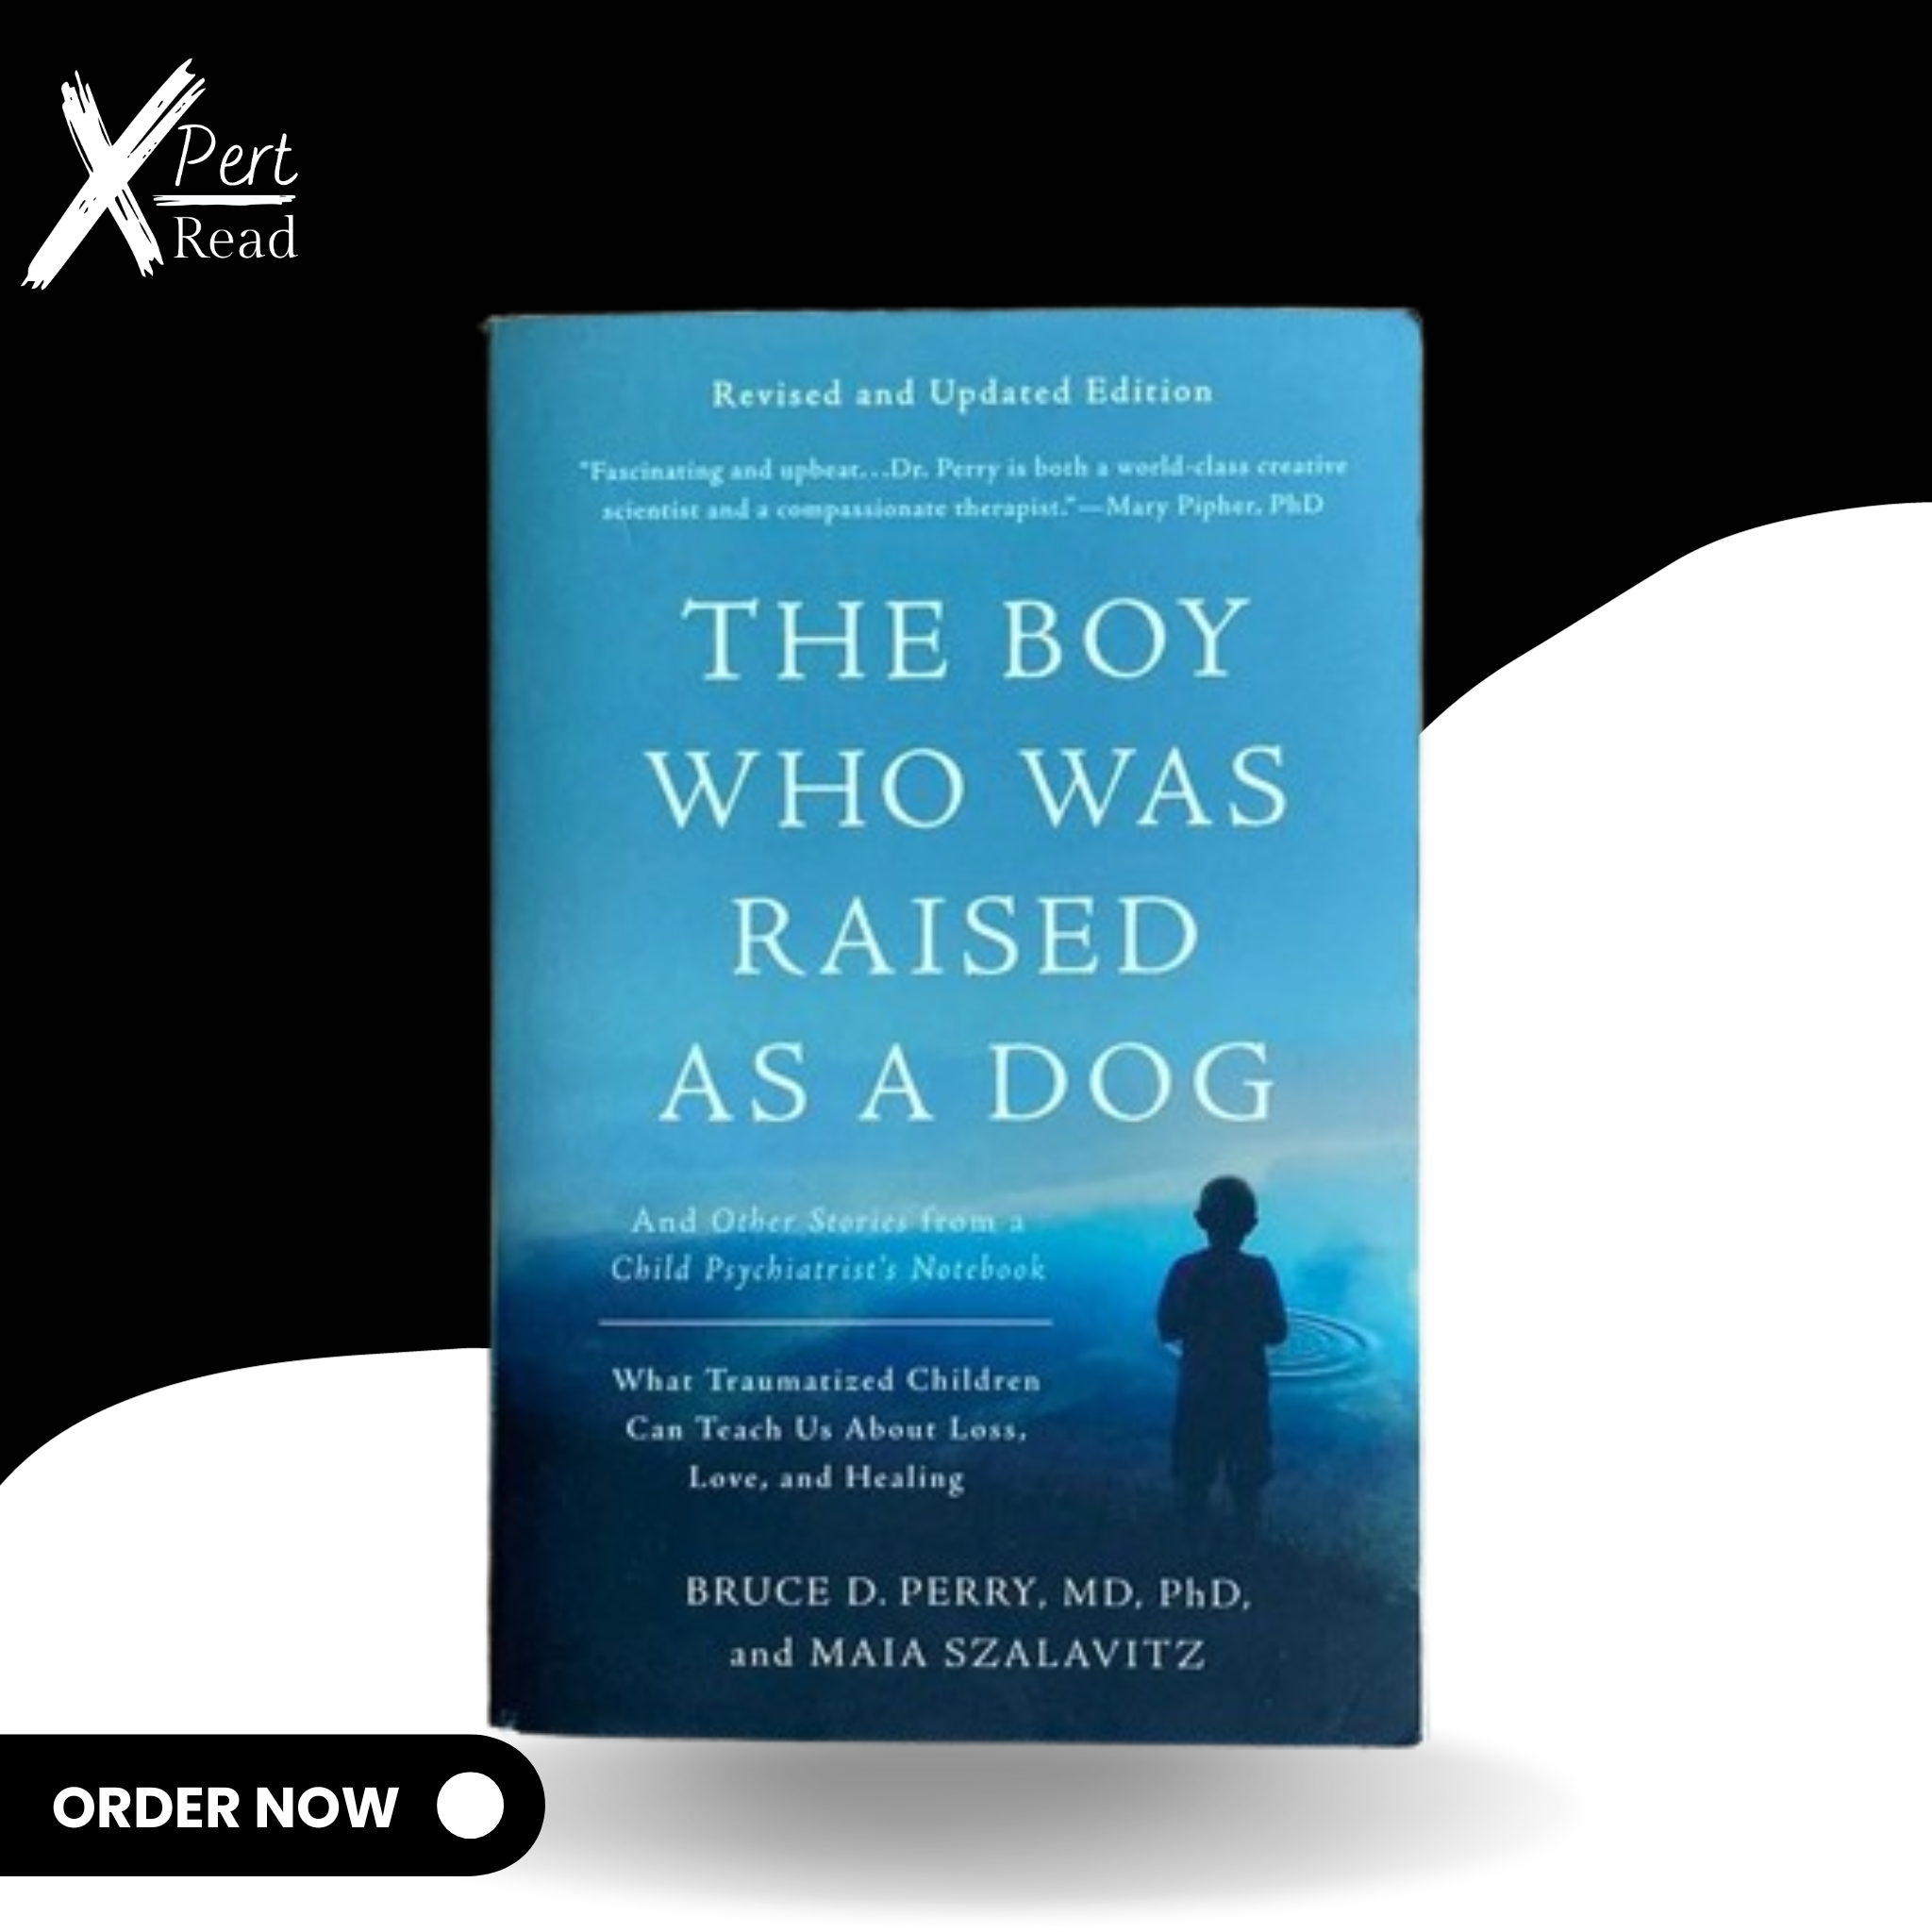 The Boy Who Was Raised By a Dog By BRUCE D.PERRY , MD. PHD. AND MAIA SZALAVITZ